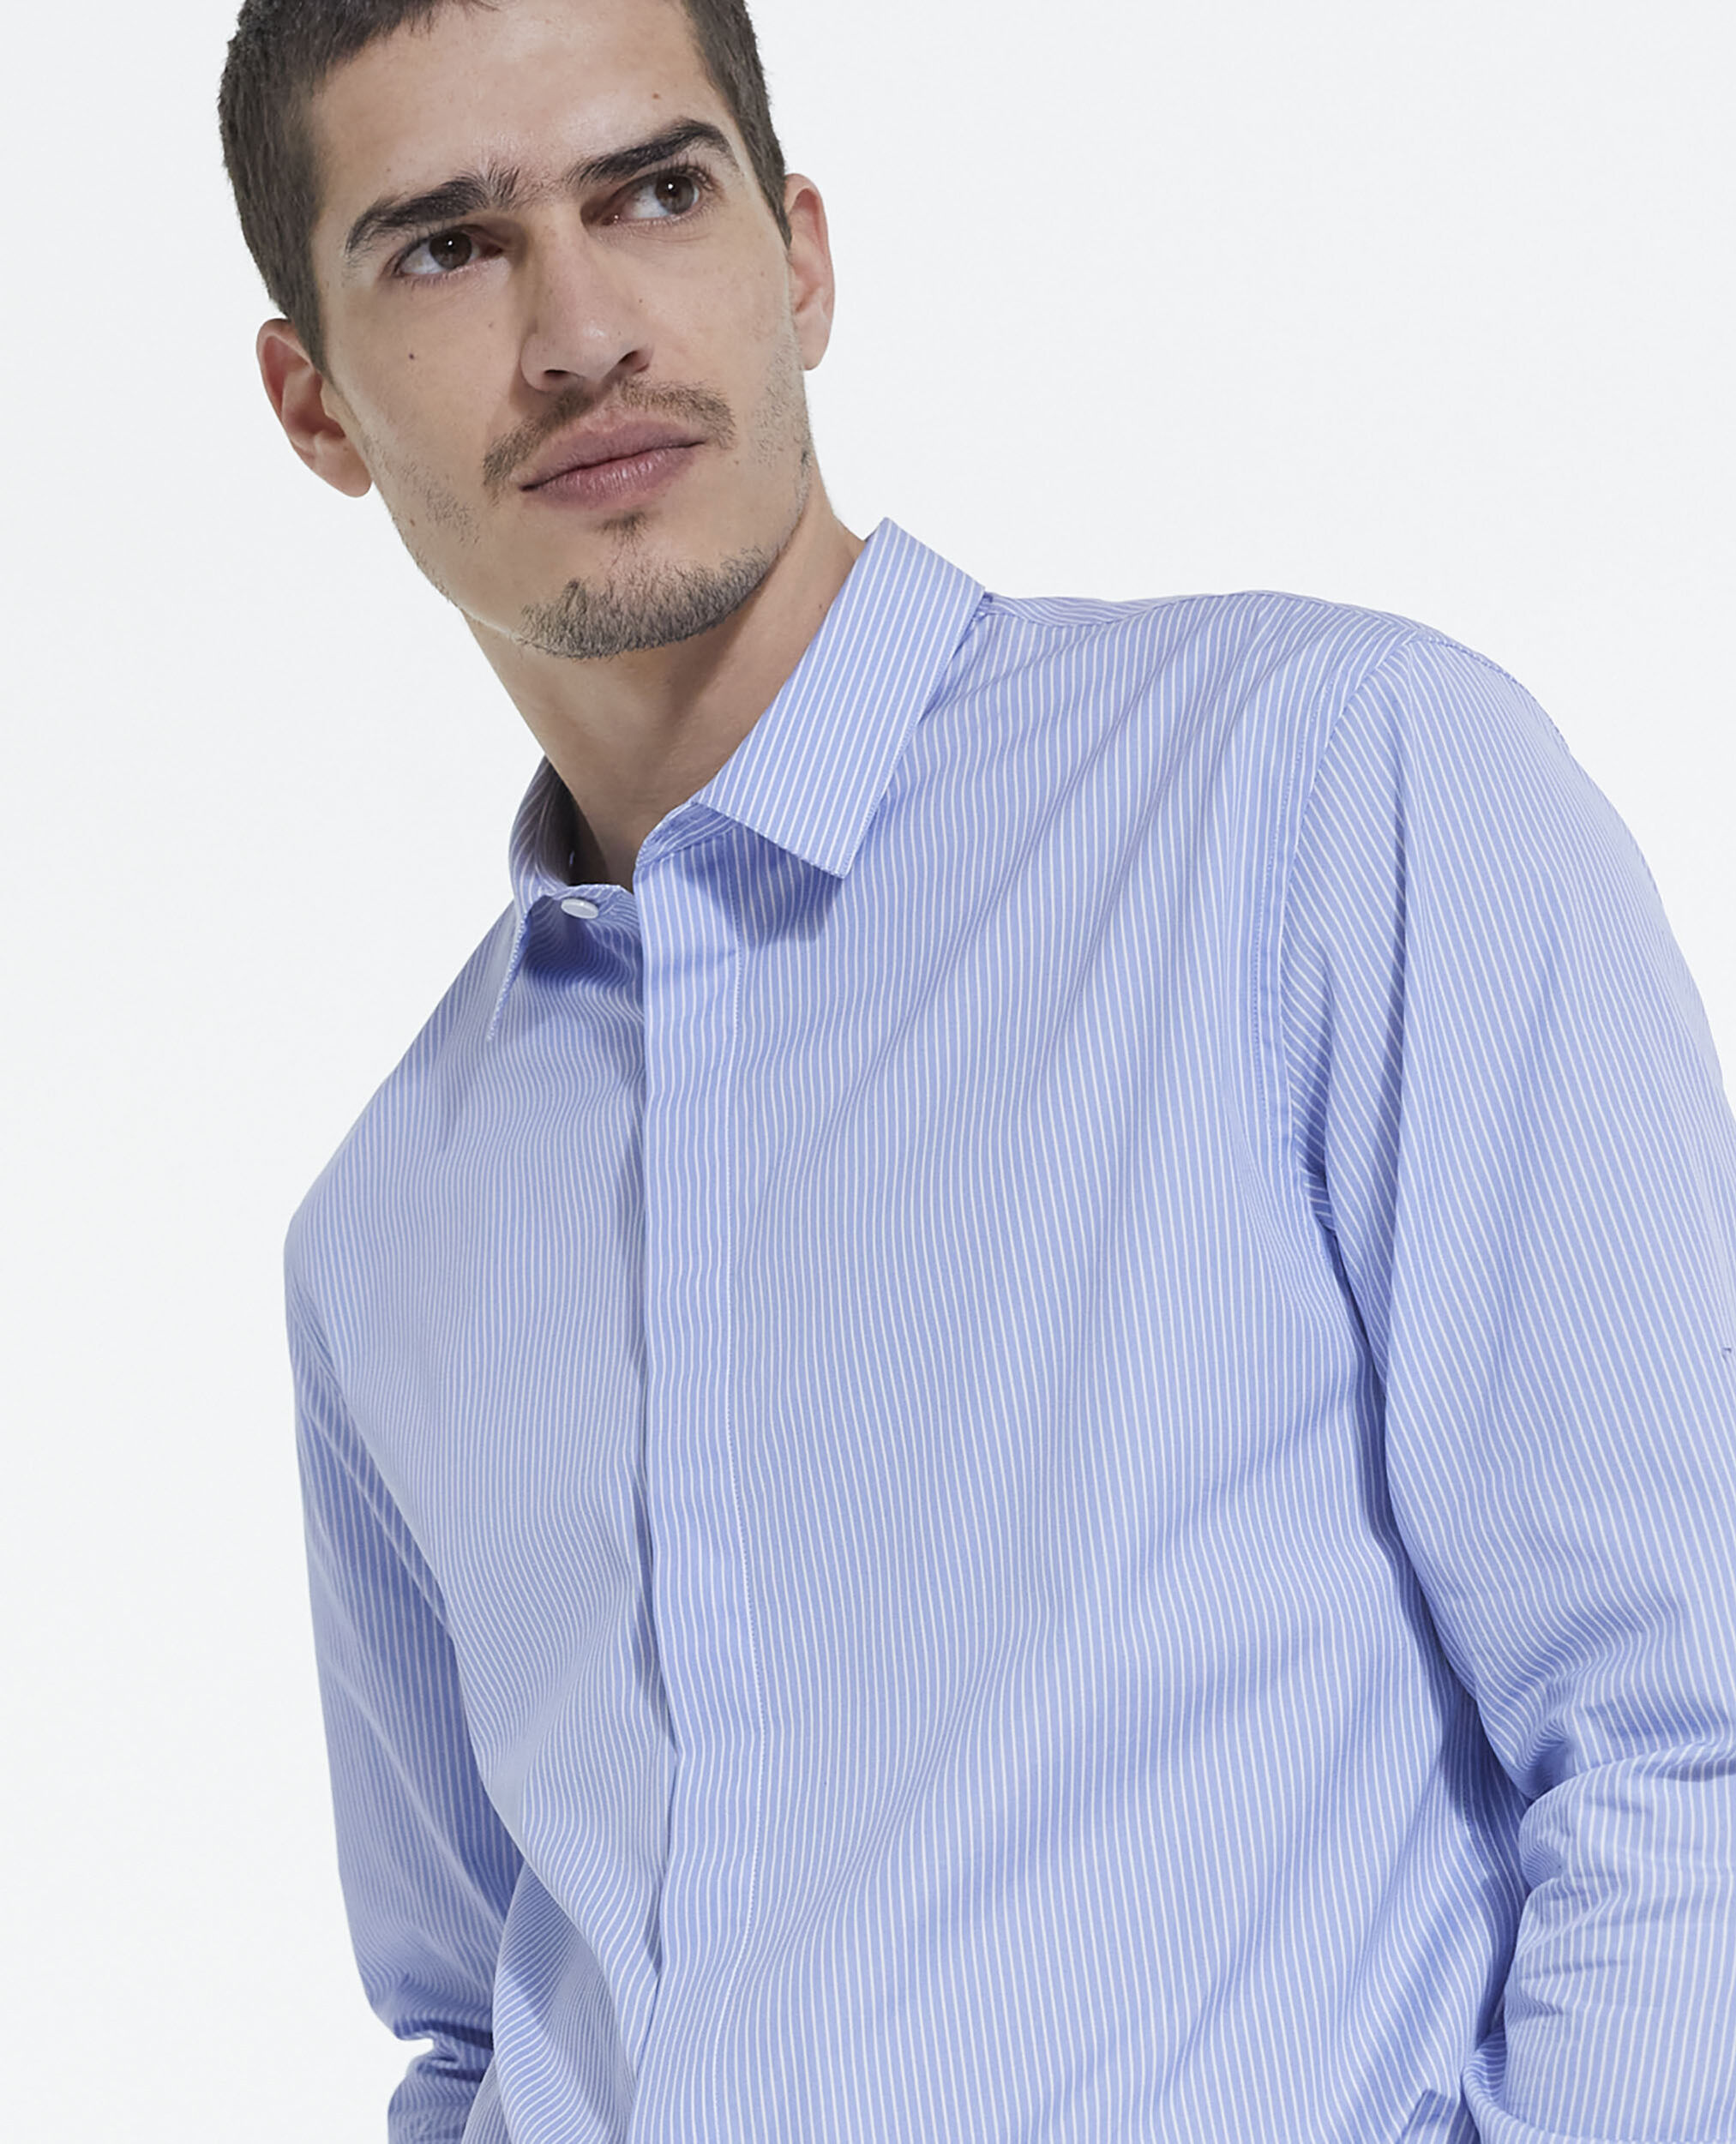 Chemise col classique à rayures, WHITE / SKY BLUE, hi-res image number null